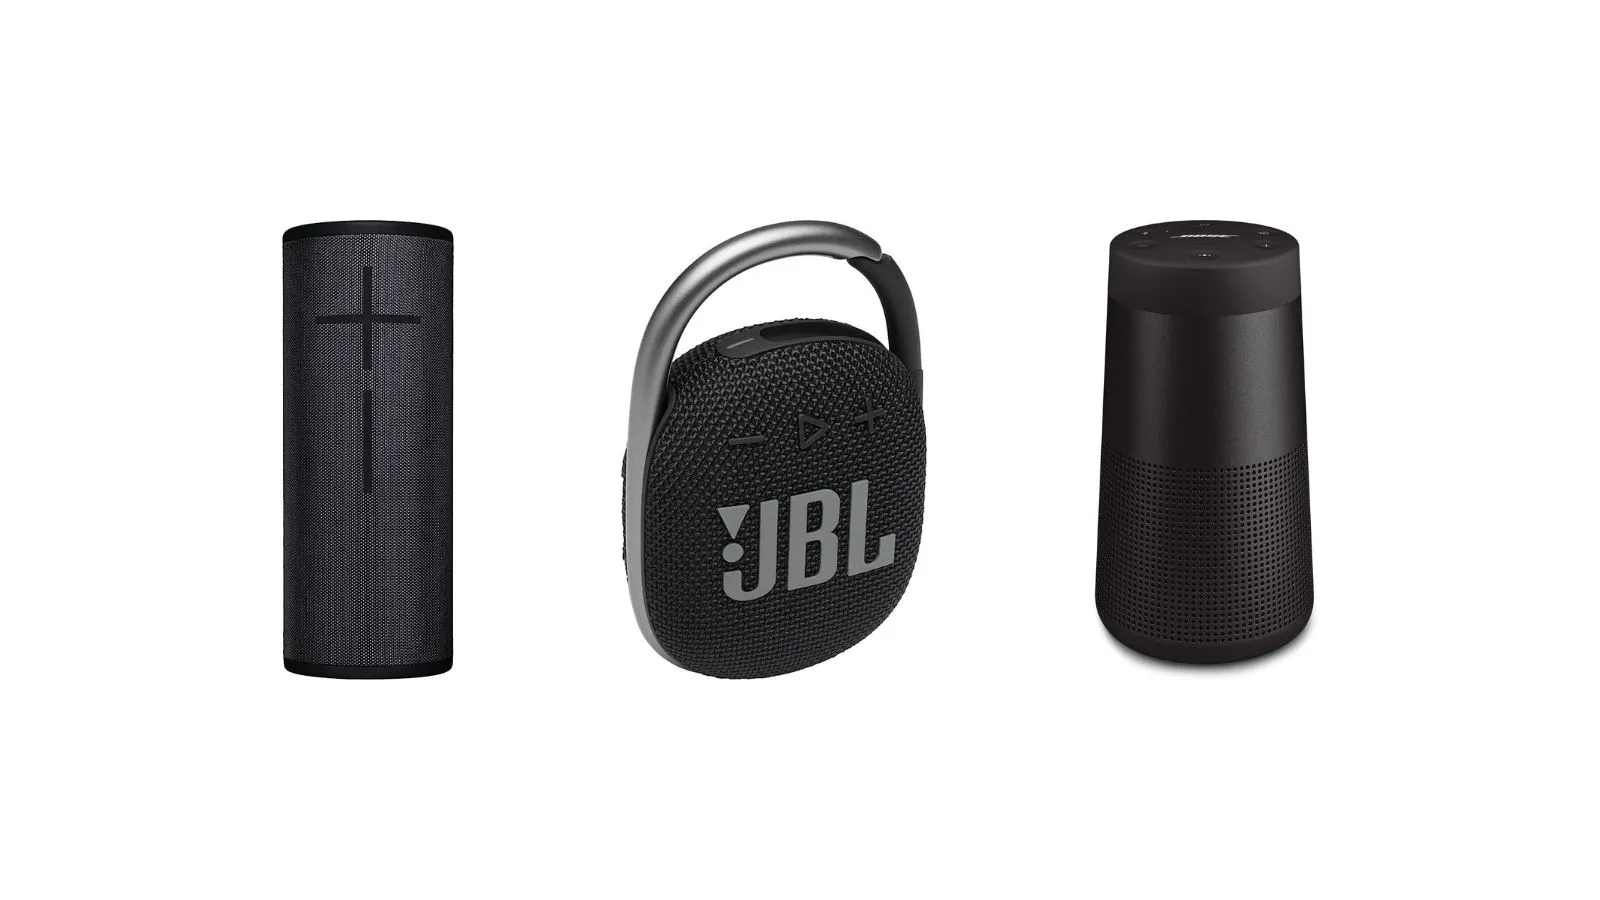 JBL's Charge 5 speaker drops to a record low in an early Black